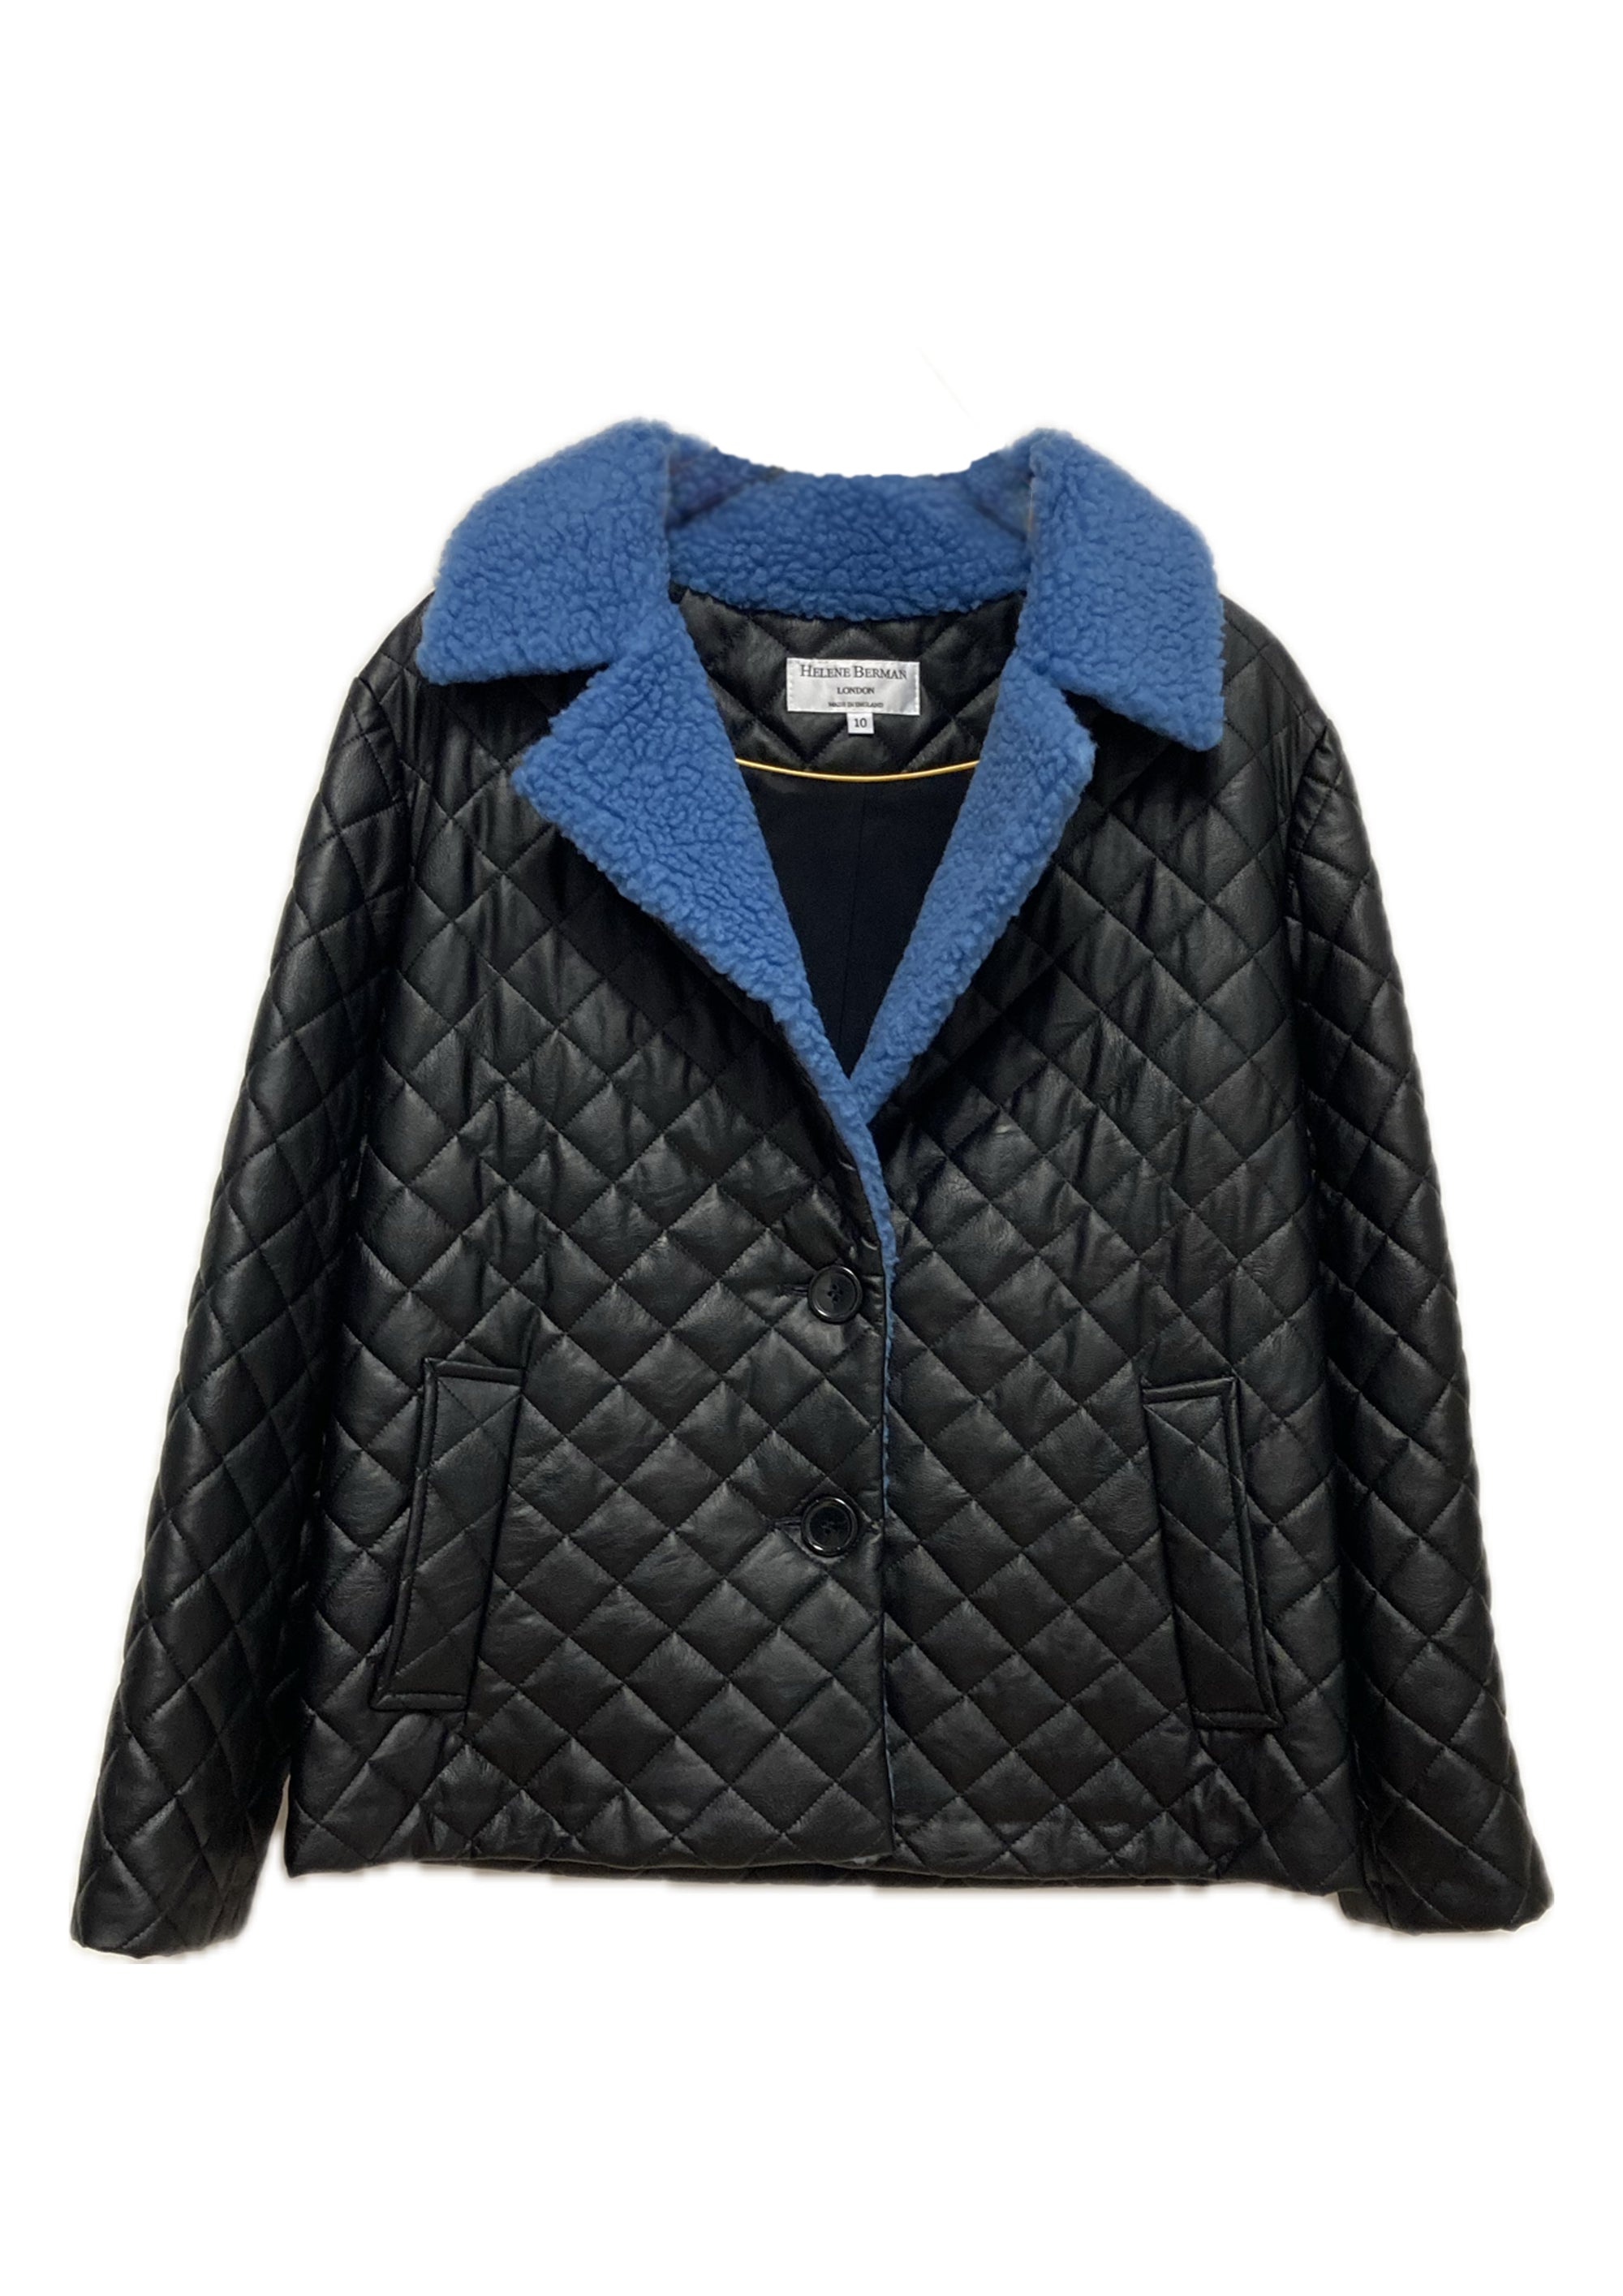 Black Pleather Quilted Jacket with Blue Teddy Collar